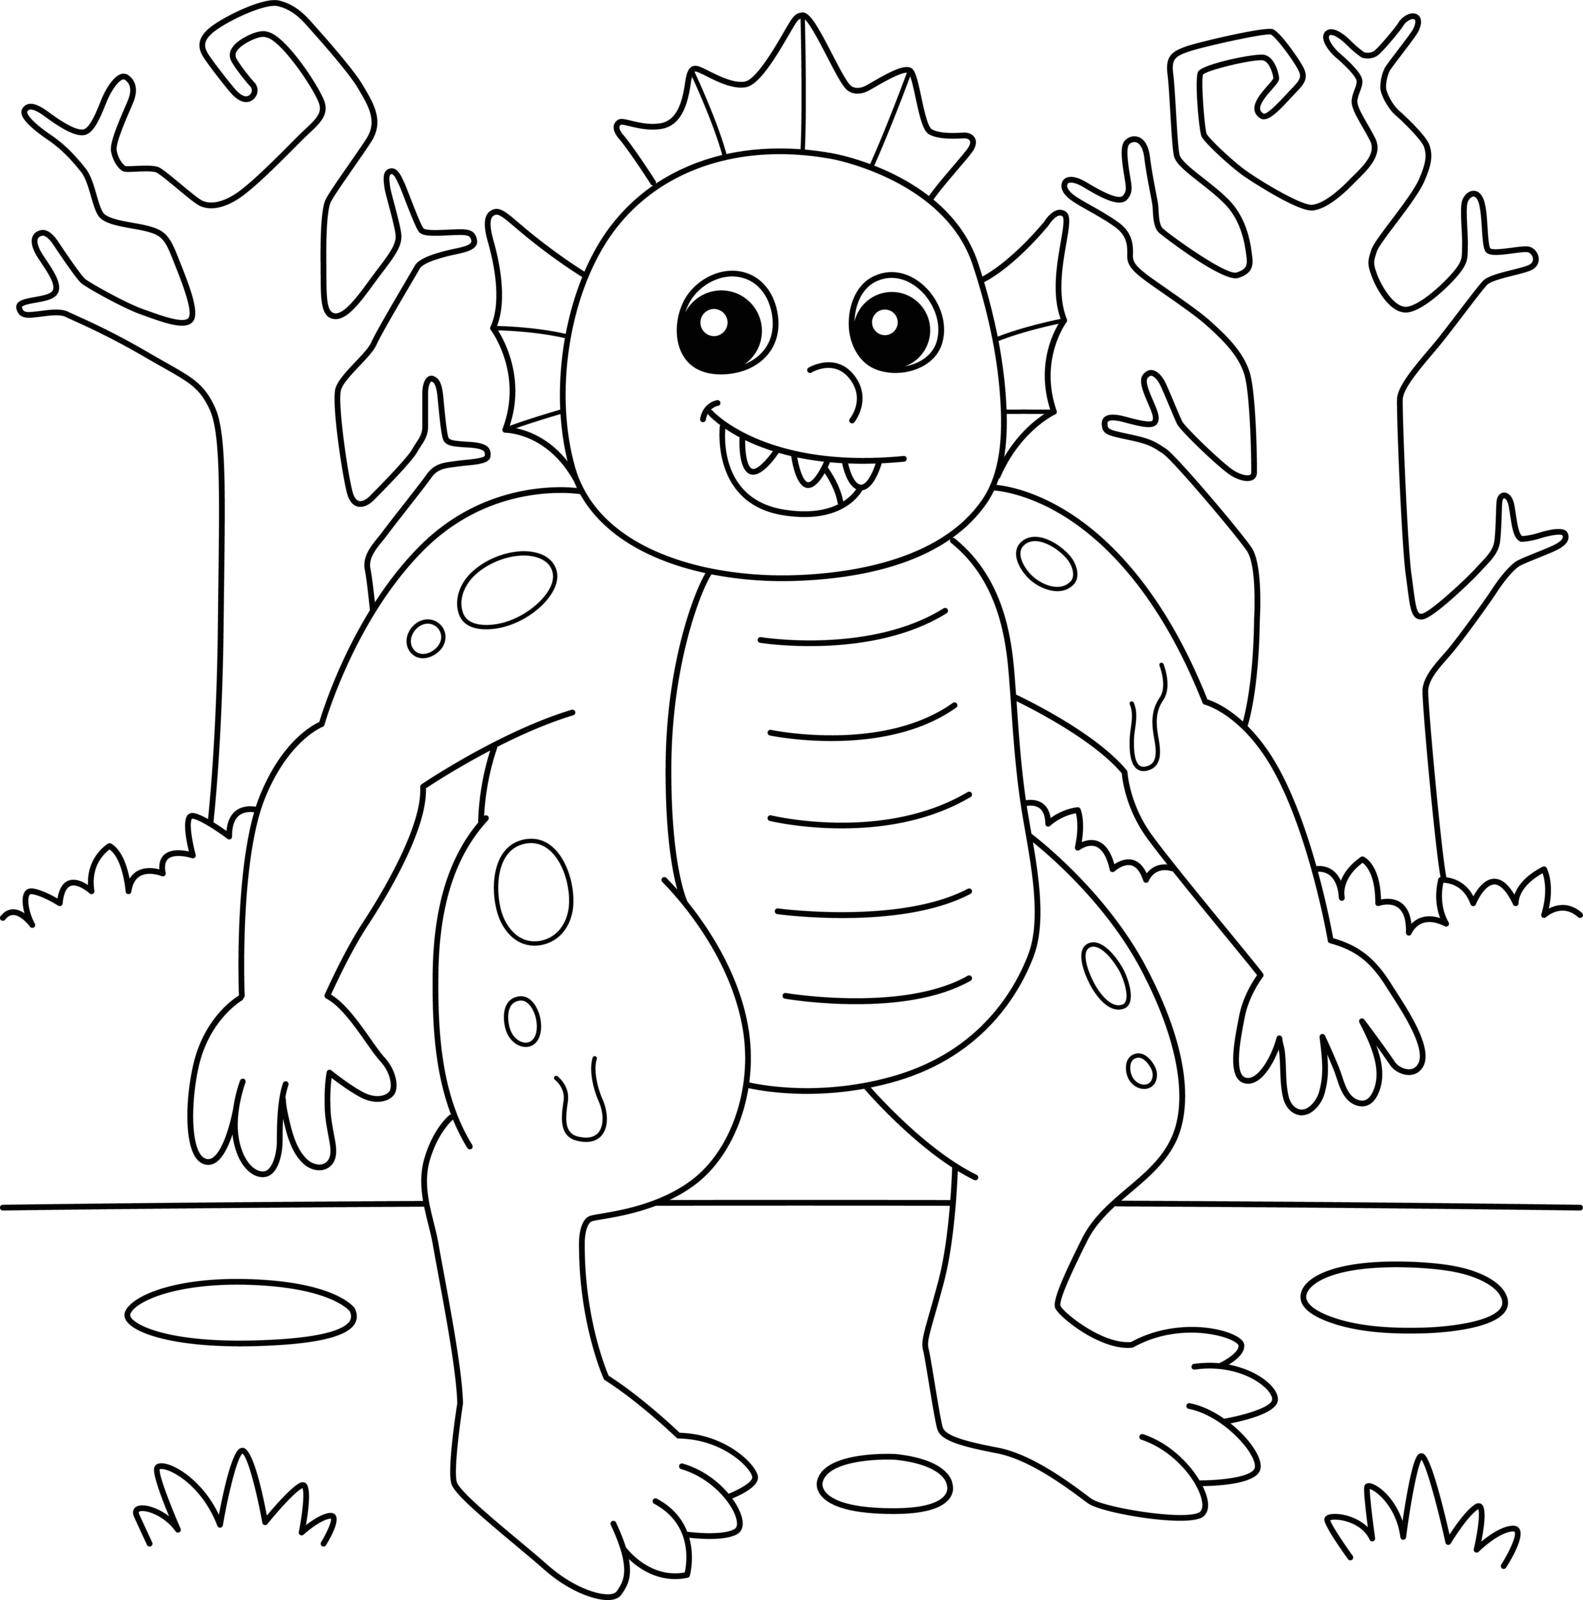 Swamp Monster Halloween Coloring Page for Kids by abbydesign